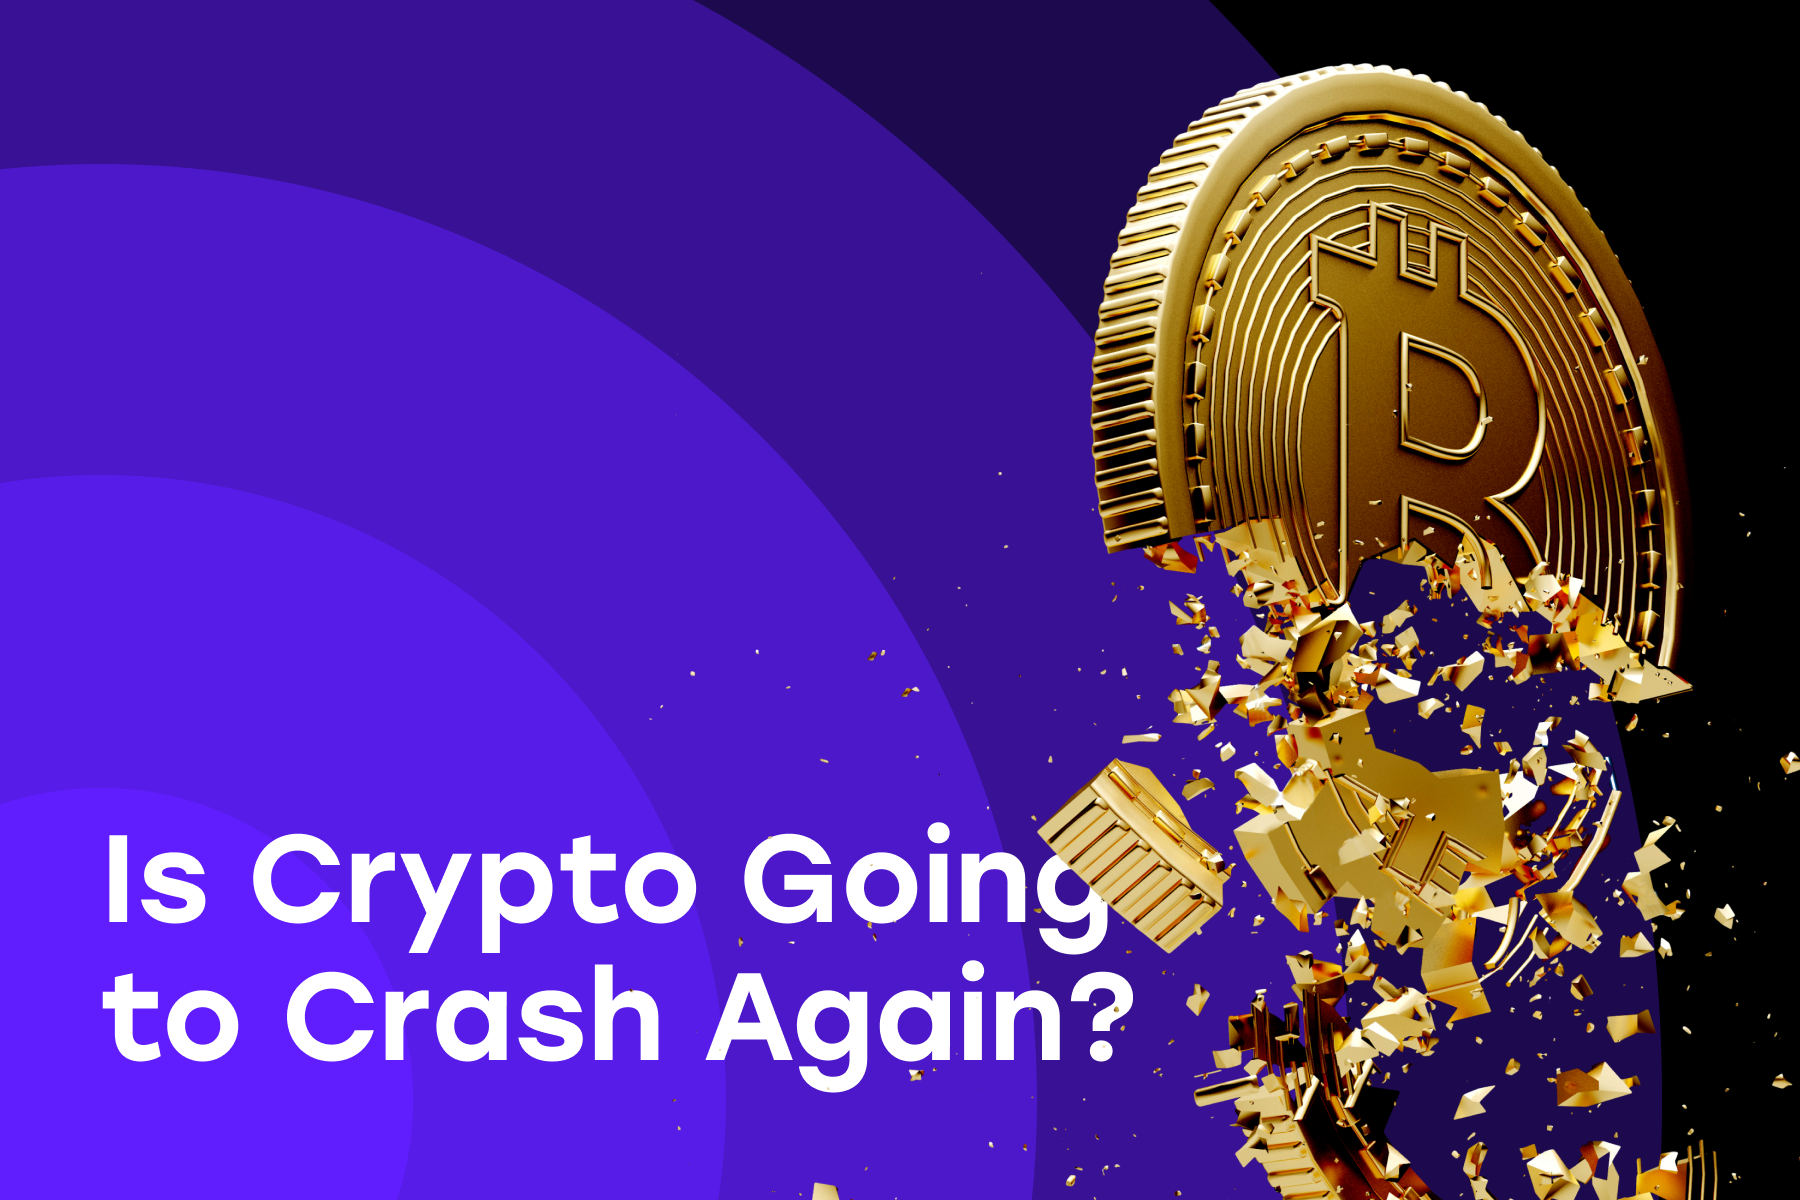 Is Crypto Going to Crash Again?